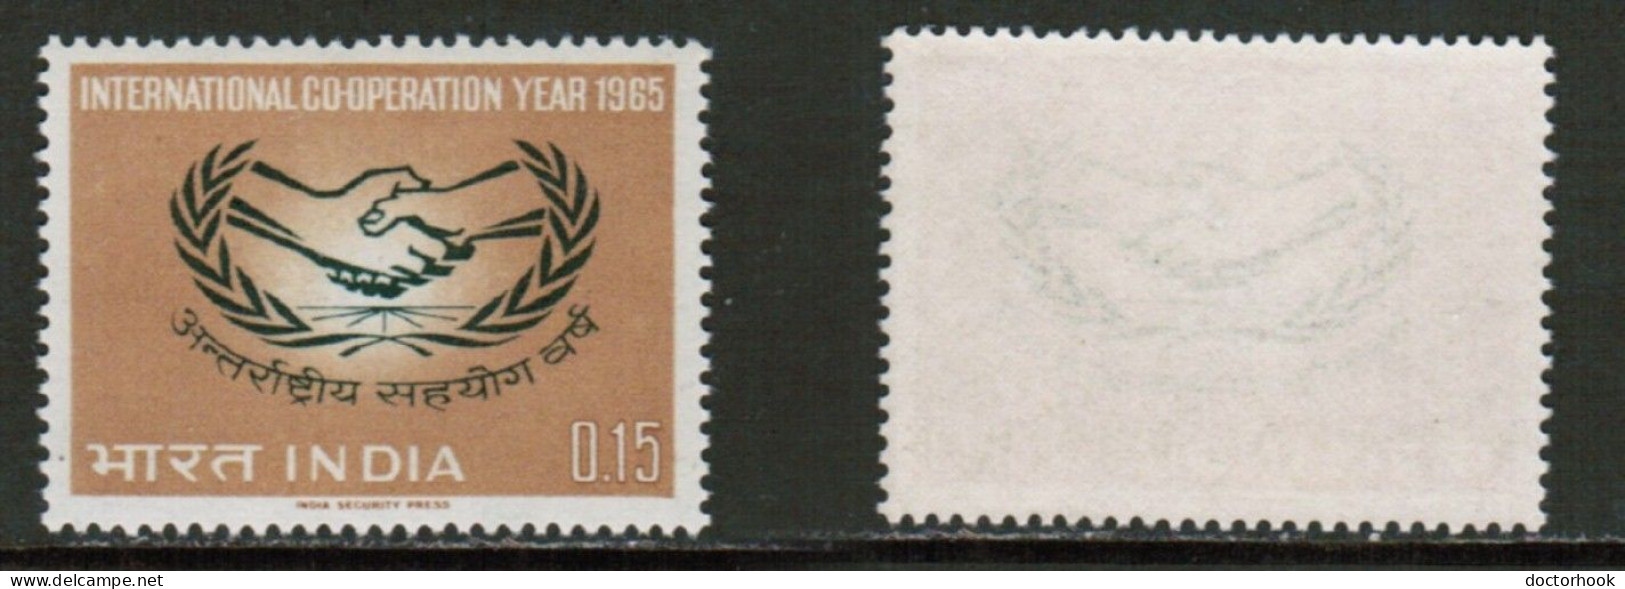 INDIA   Scott # 403** MINT NH (CONDITION AS PER SCAN) (Stamp Scan # 919-6) - Unused Stamps